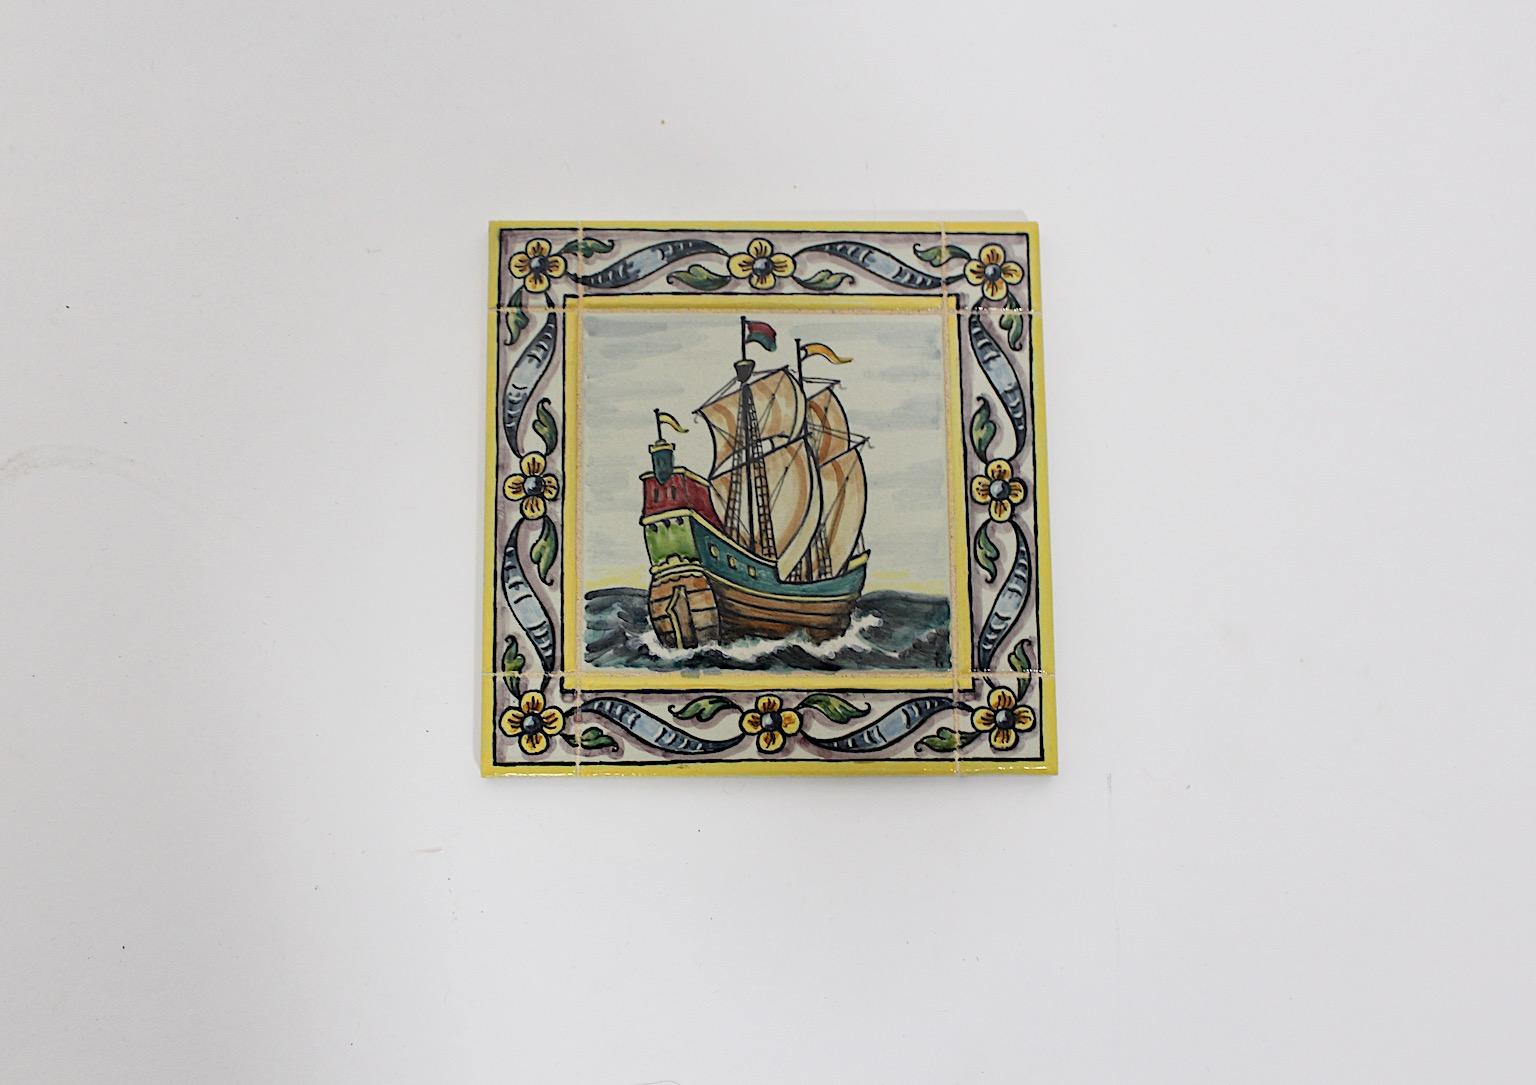 Mid-Century Modern vintage ceramic tile motif multicolored sail ship framed with flowers 1960s, Spain.
A stunning ceramic tile with a multicolored motif sail ship framed with flowers.
This tile comes from a private source, who collected these